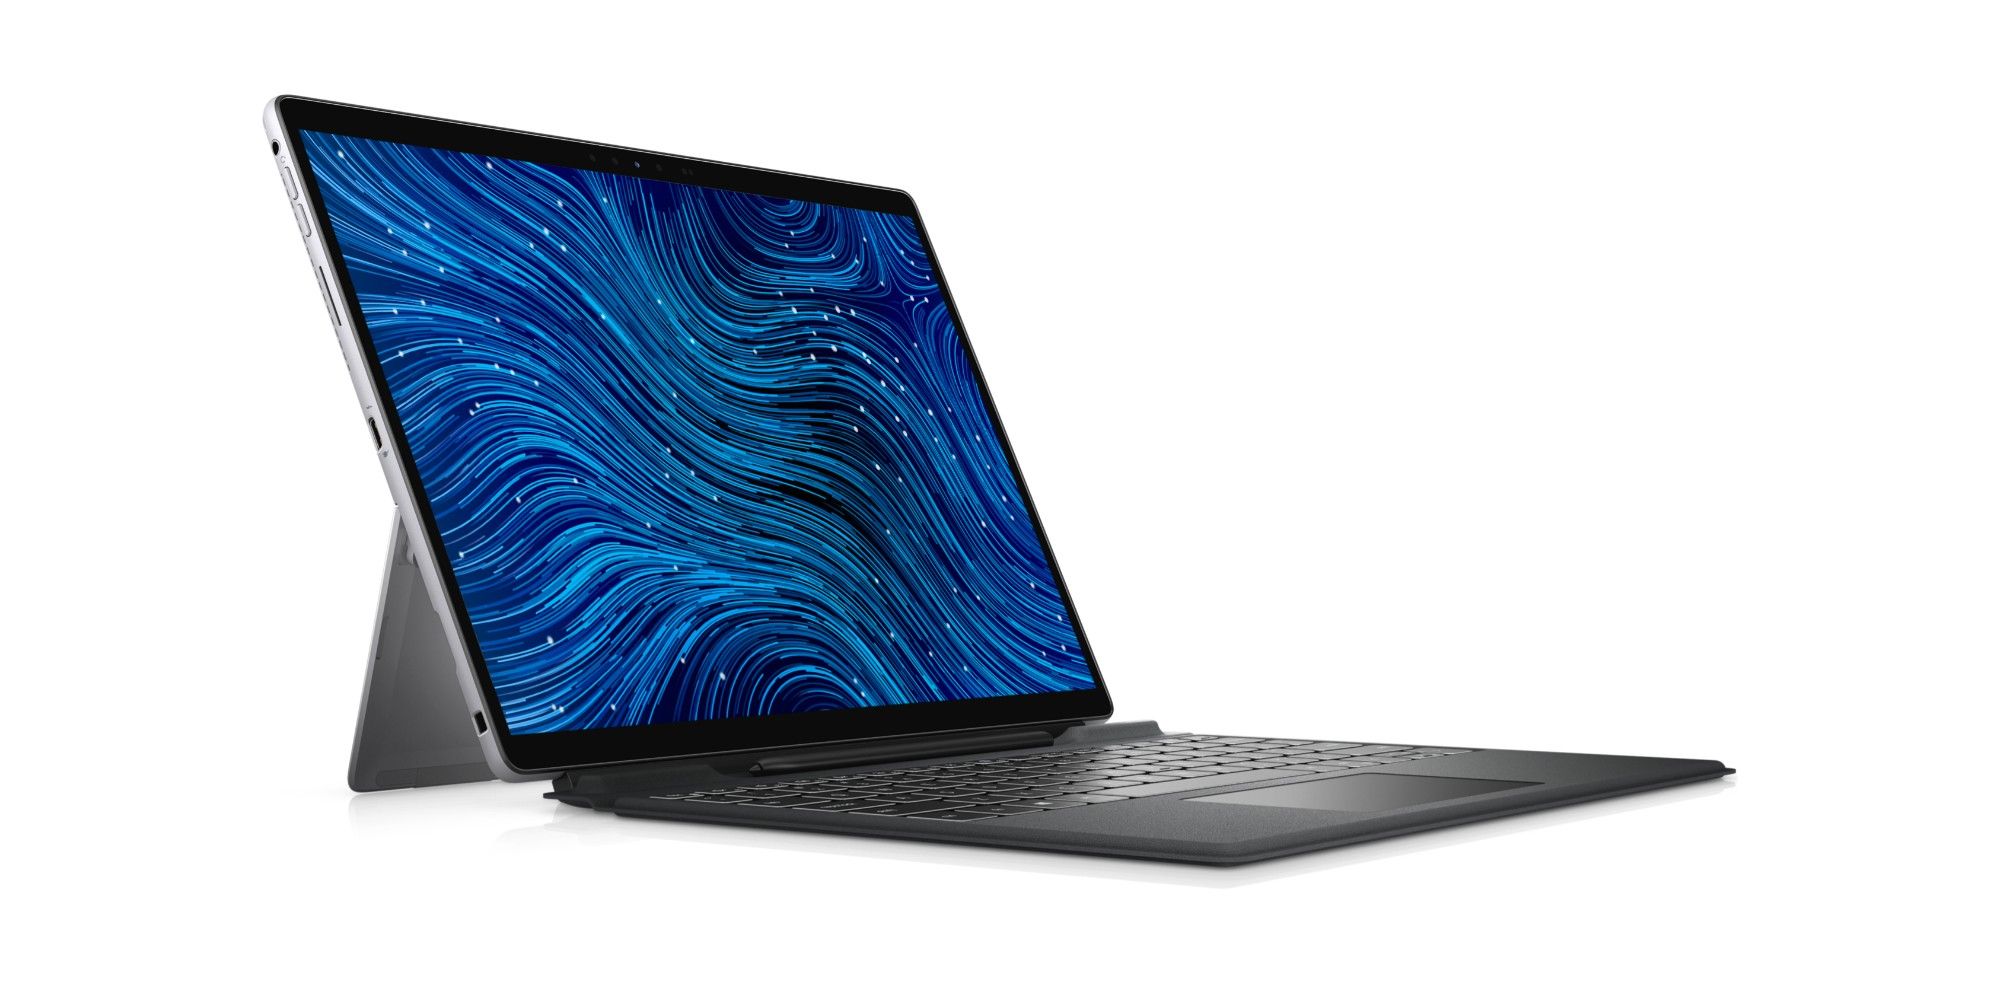 Dell will soon launch a new 2-in-1 detachable under its XPS series